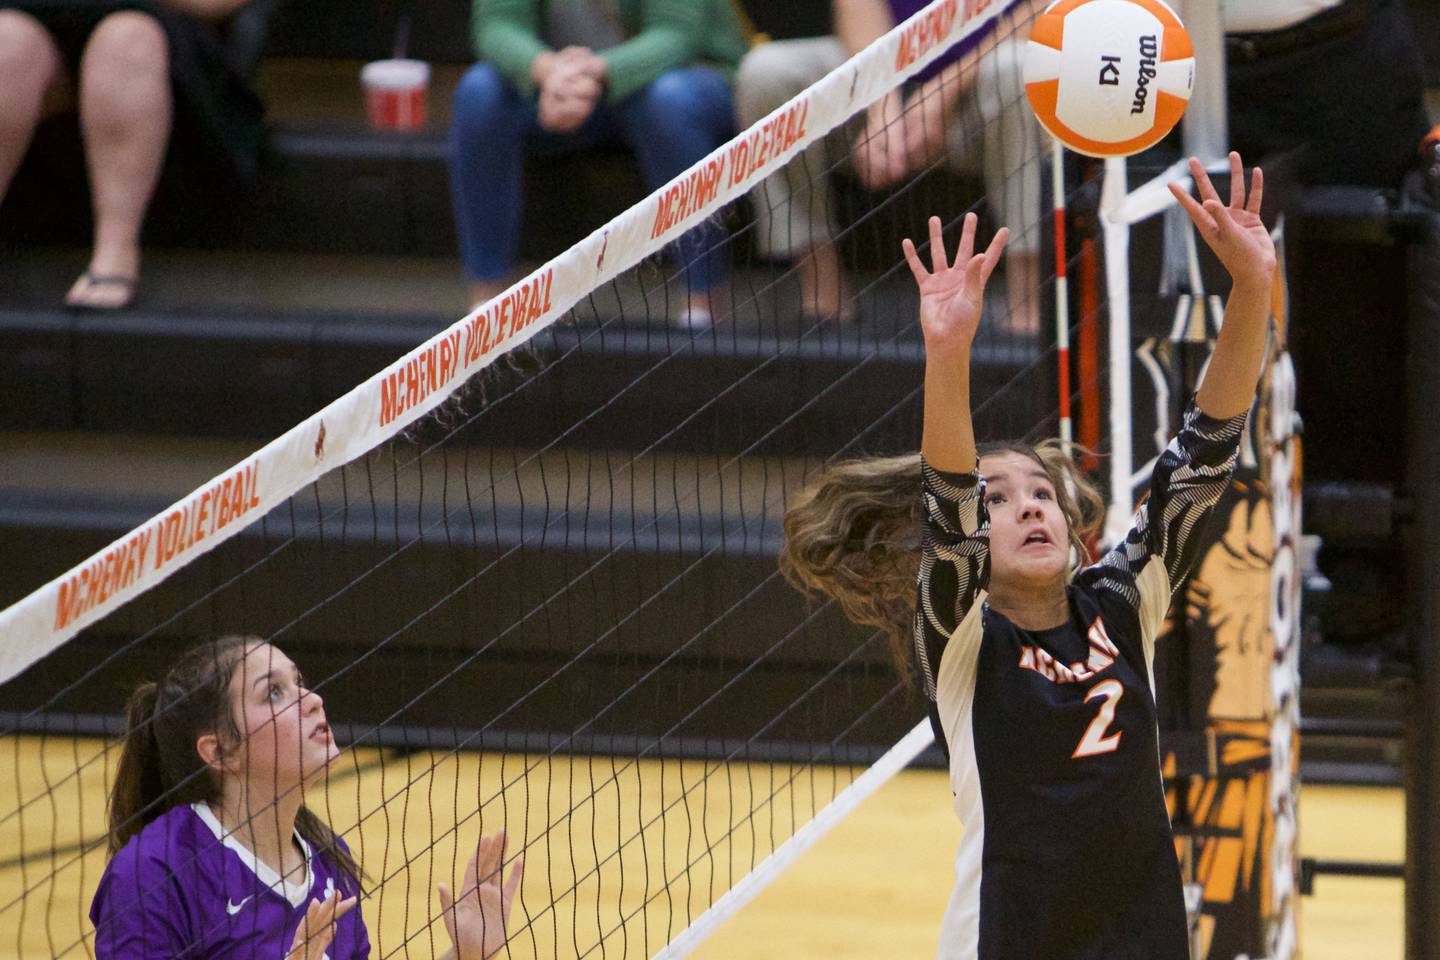 McHenry's Ella Jenkins with the set against Hampshire on Tuesday, Sept. 6,2022 in McHenry.